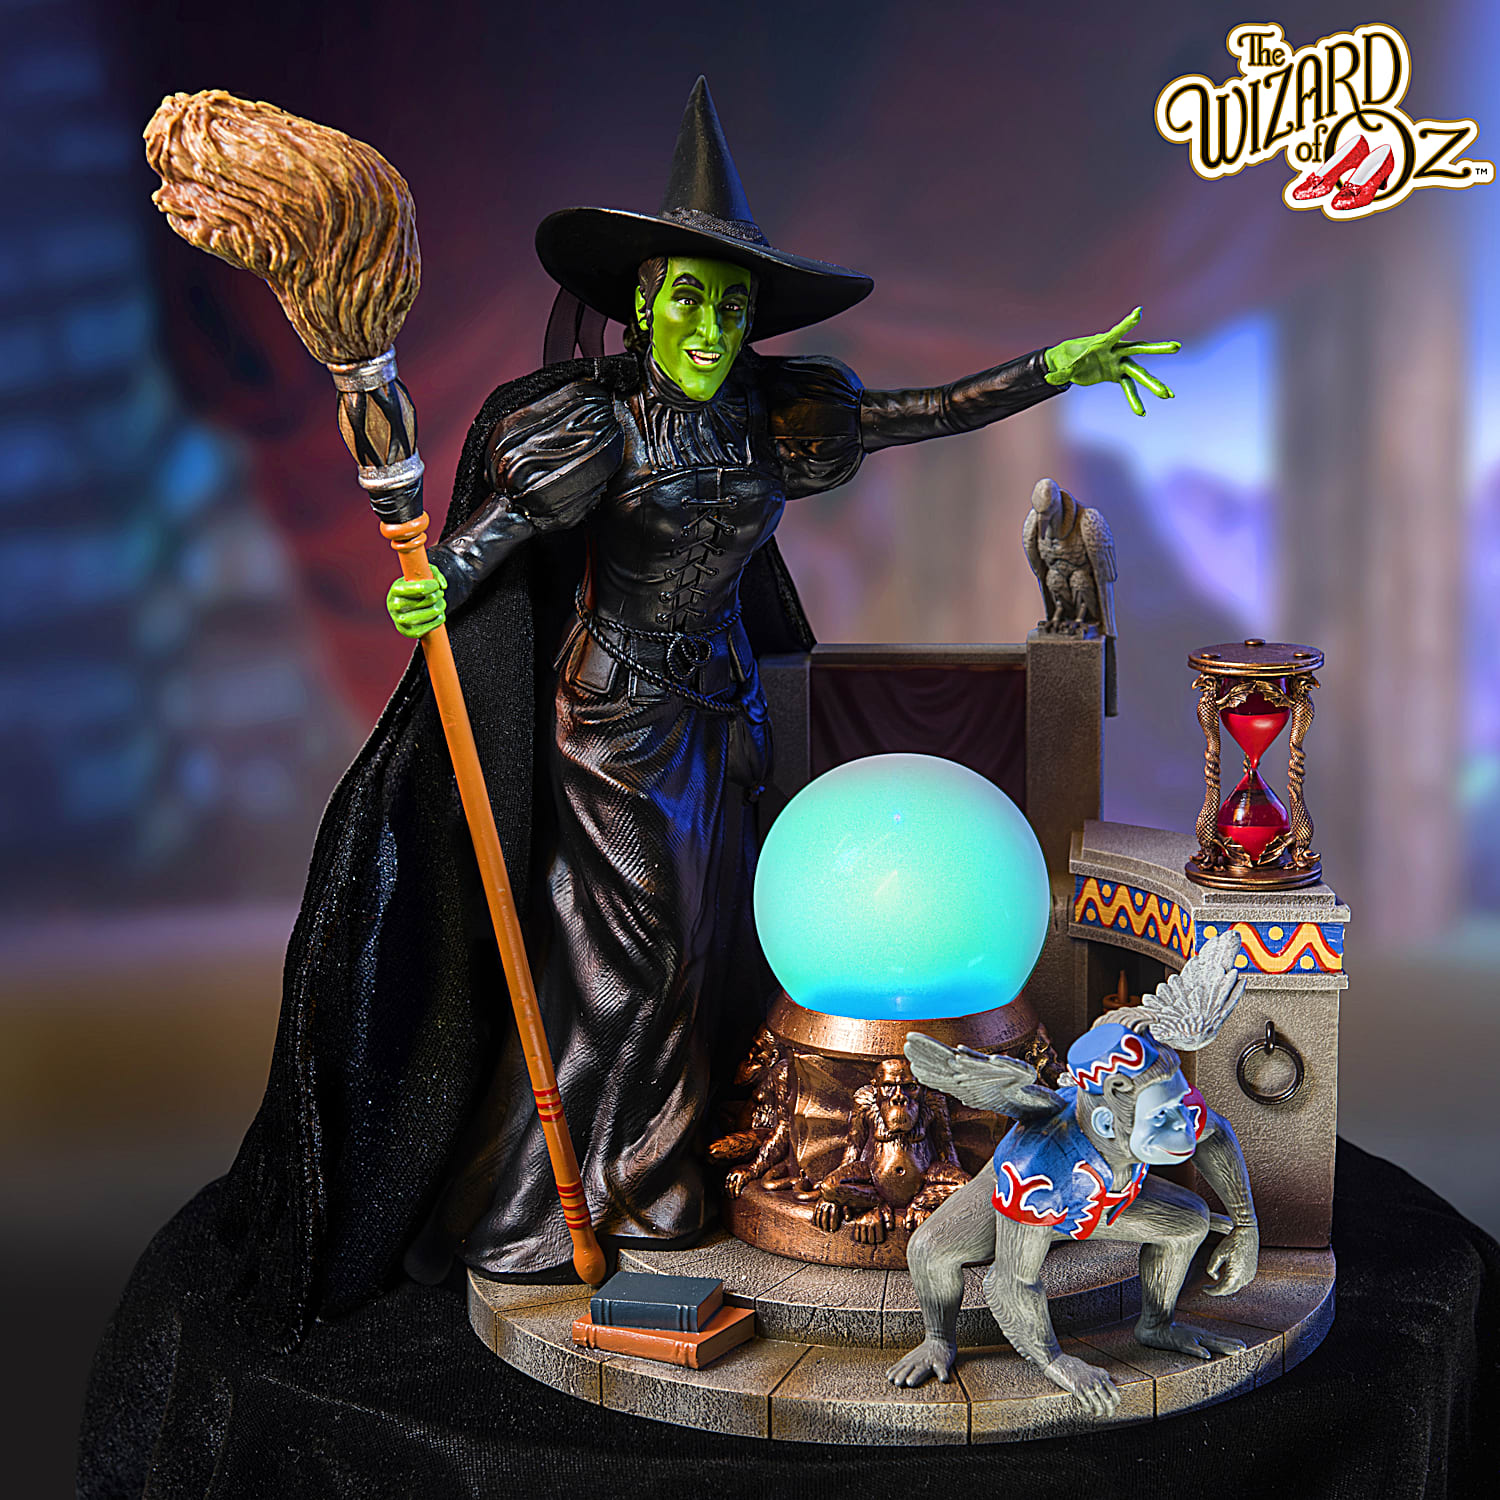 THE WIZARD OF OZ Wicked Witch Of The West Poseable Portrait Figure With  Hand-Painted Details